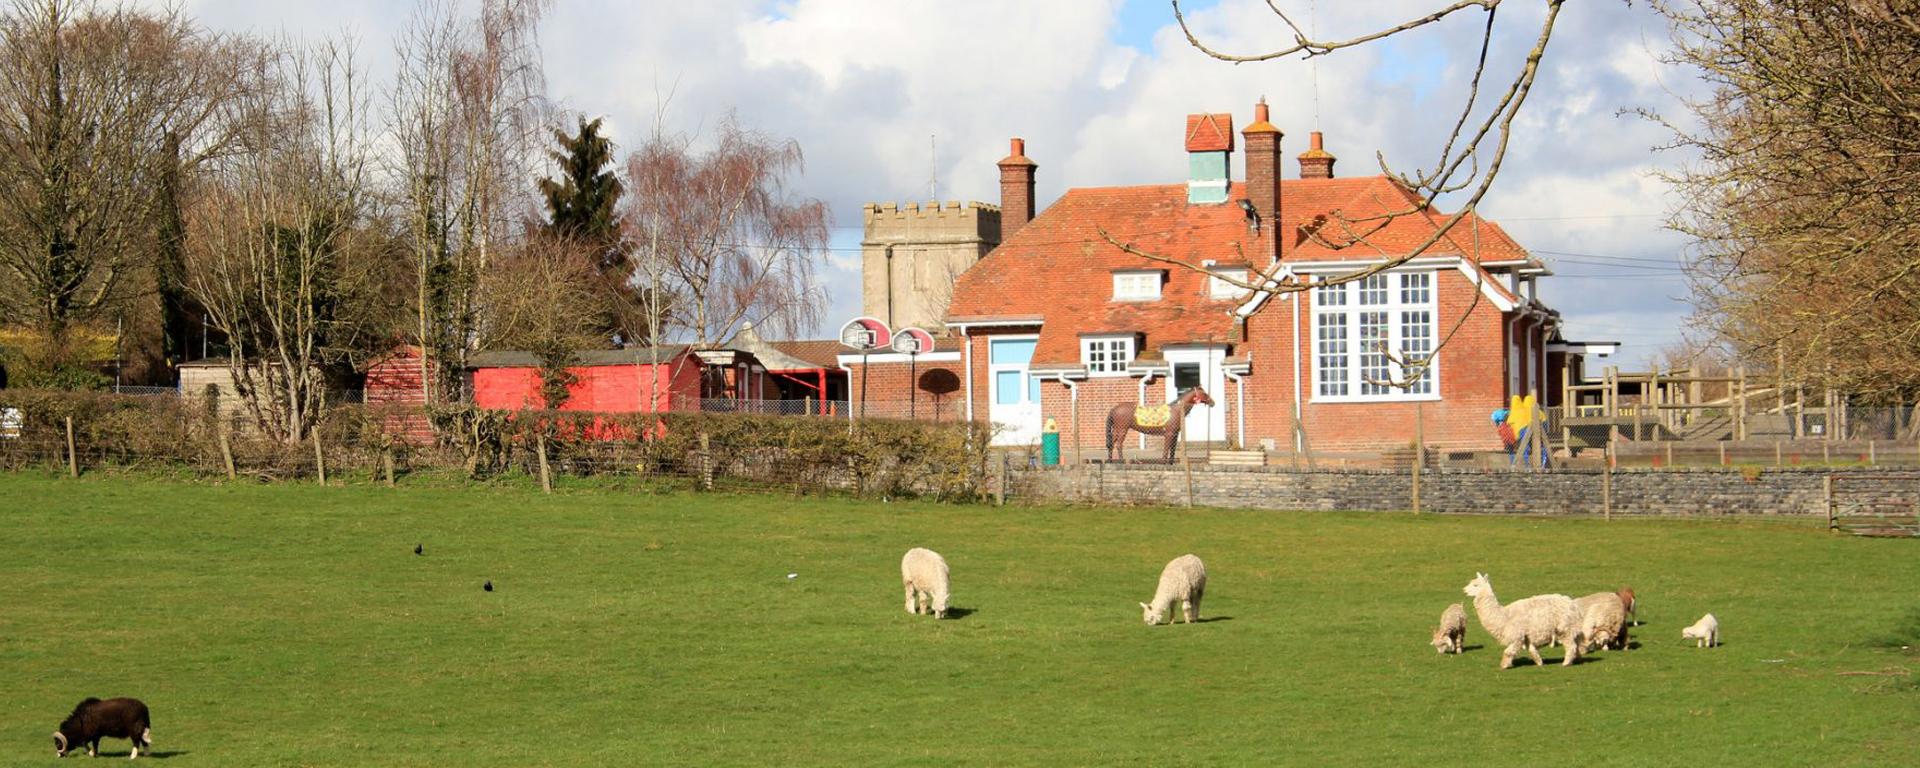 A view of The Ilsleys Primary School from the Recreation Ground.